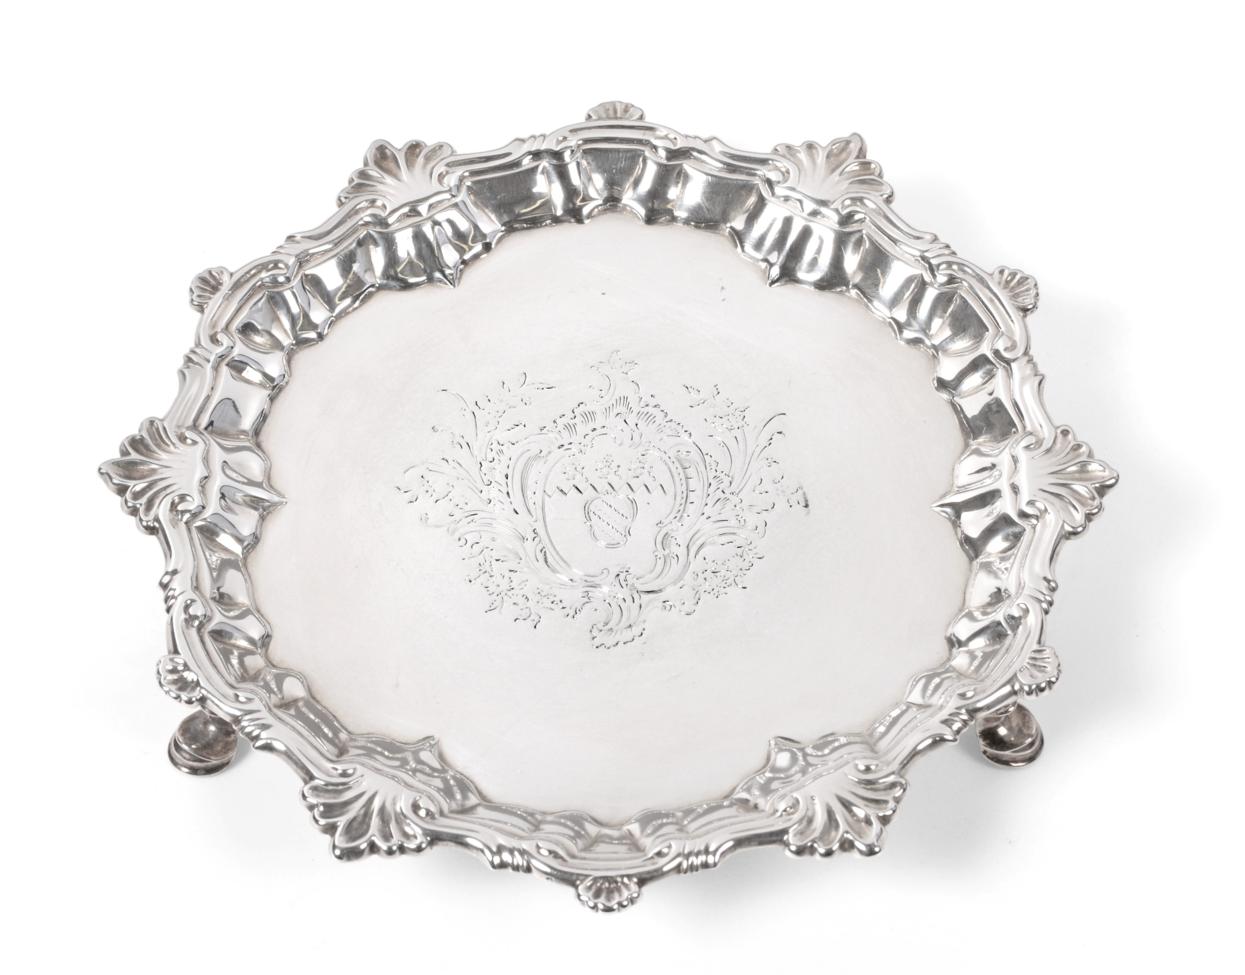 Lot 77 - A George II Silver Waiter, by William Peaston, London, 1751, shaped circular and on three pad feet